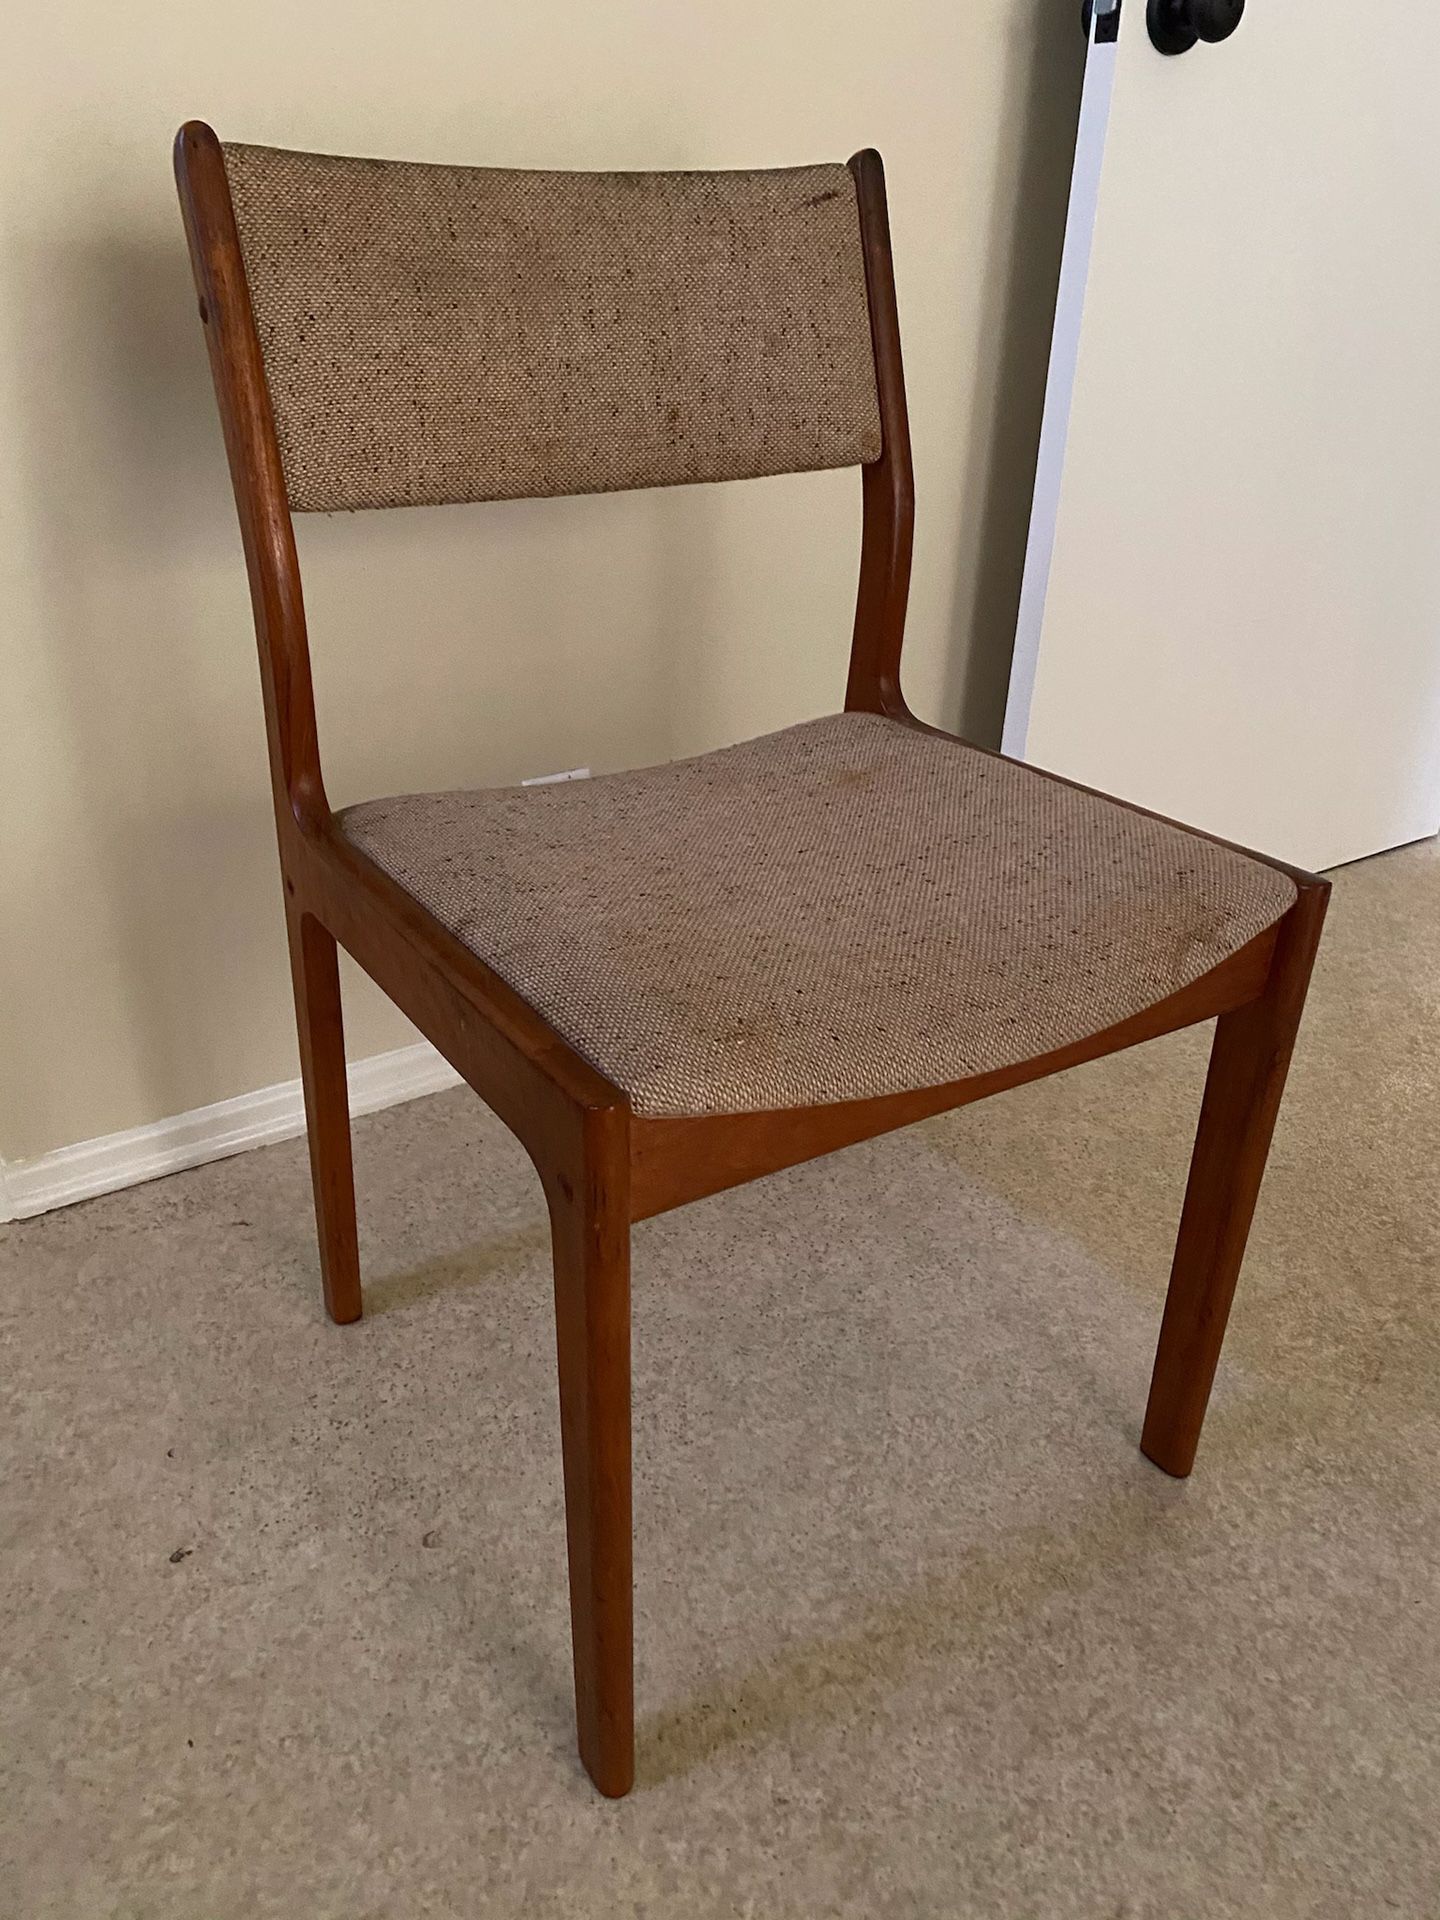 Free antique chairs set of 6 free